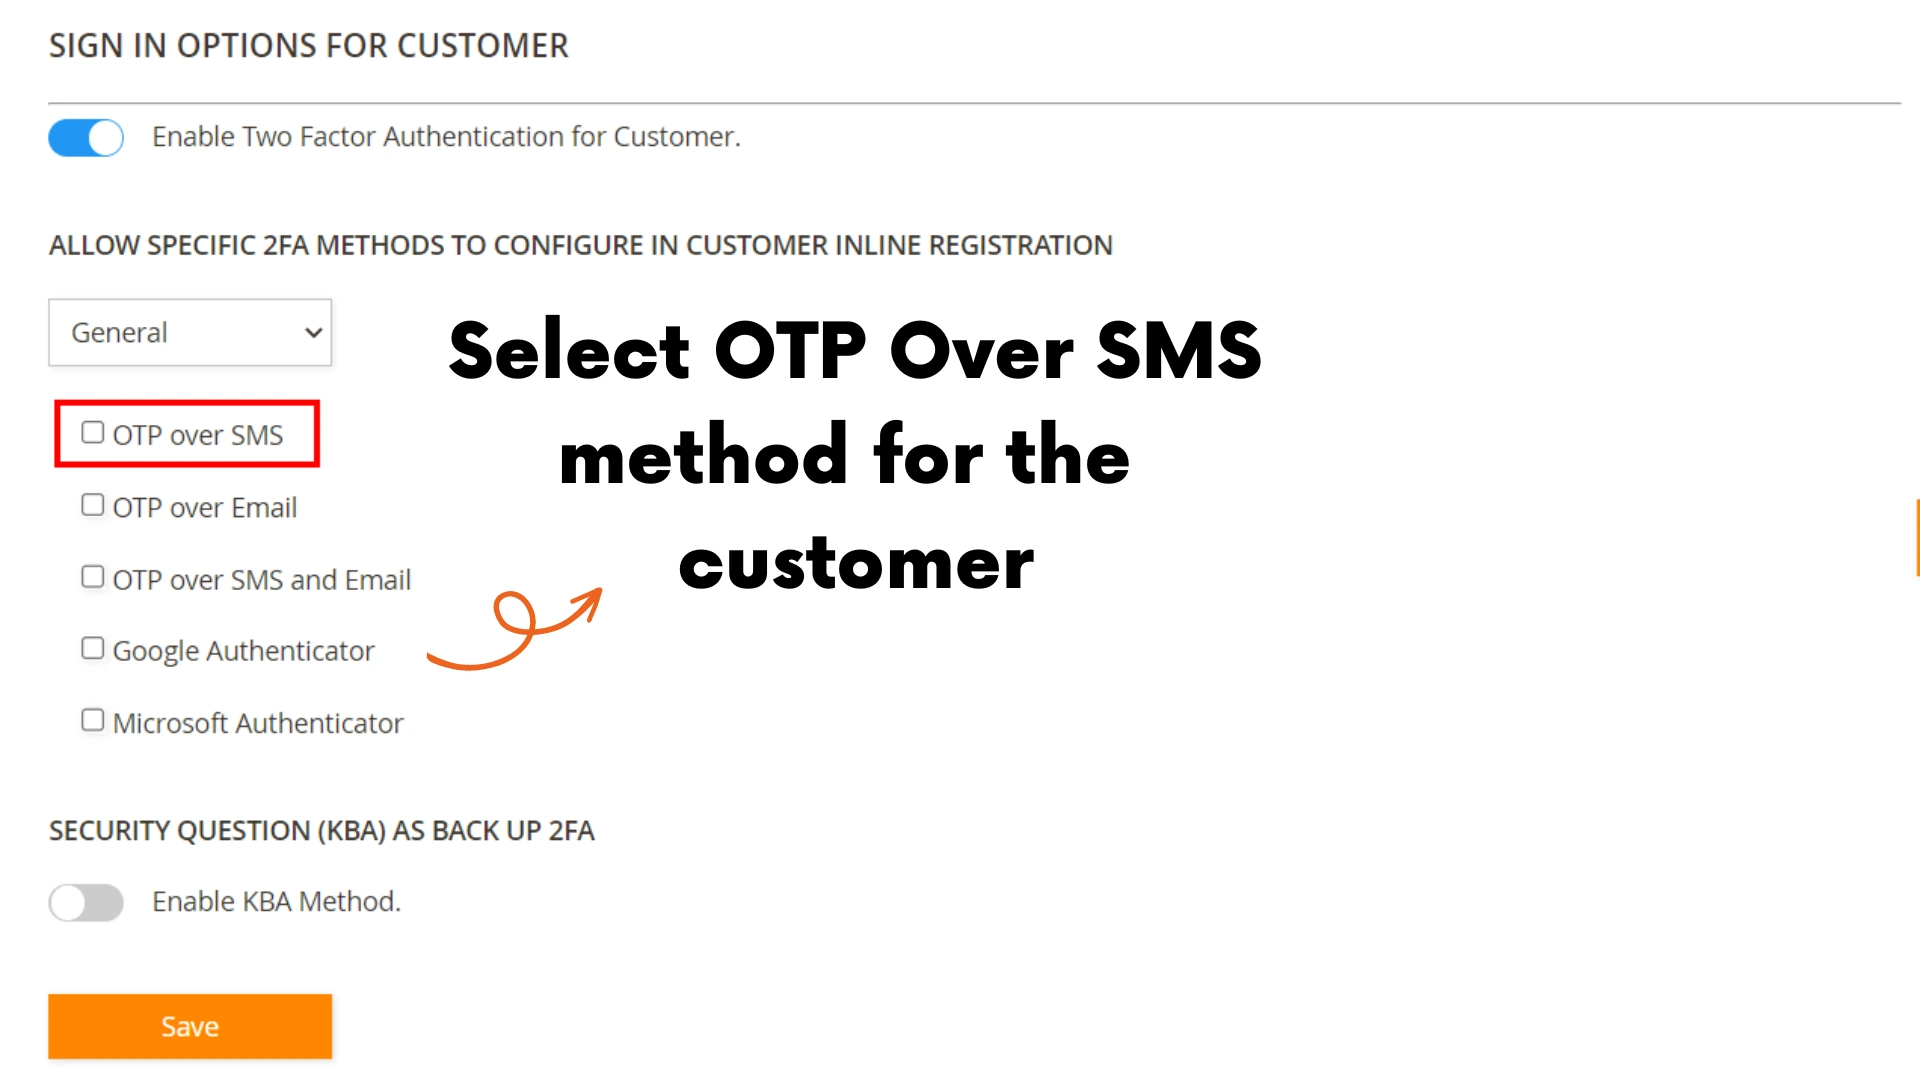 TYPO3 2 Factor Authentication (2fa) (mfa) OTP over SMS registration | TYPO3 OTP over SMS verification | TYPO3 sms verification